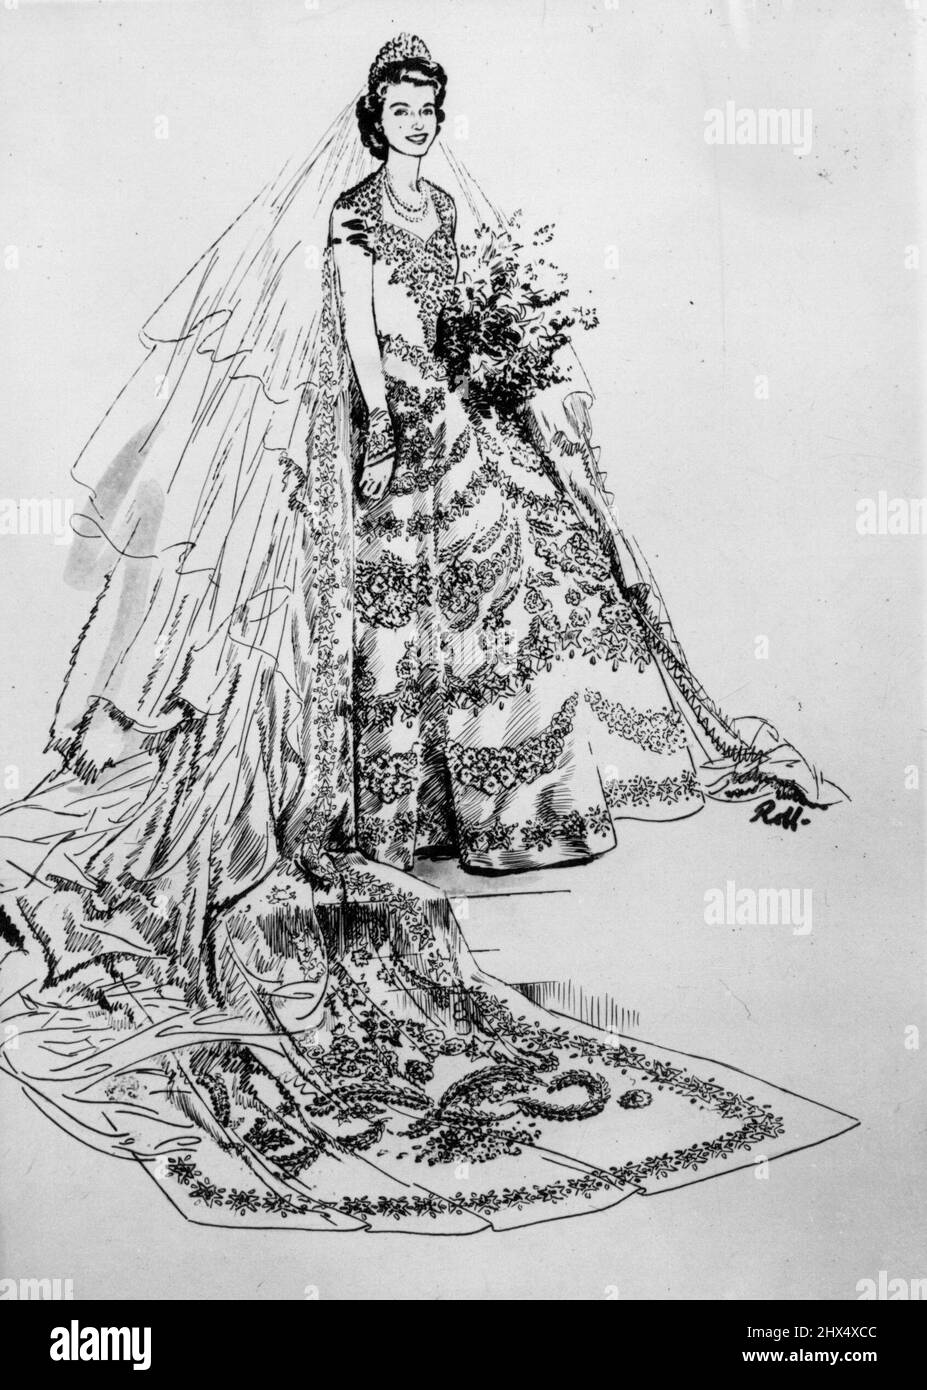 Royal Wedding: Princess Elizabeth's Weddings Dress -- A Princess Gown of ivory Duchesse satin, cut on Classing lines, with fitted Bride, Long tight sleeves and full falling Skirt. The Broad heart-shaped neckline of the ***** is Delicately Embroidered with seed Pearls and Crystal in a in a Floral Design. From the pointed waist-line, formed by a Girdle of Pearl Embroidered star flowers, the swirling skirt is Gloriously hand Embroidered in an Exquisite Design inspired by the paintings of Botticelli representing Garlands of White York Roses Carried out in raised Pearls Entwined with Ears of Corn M Stock Photo